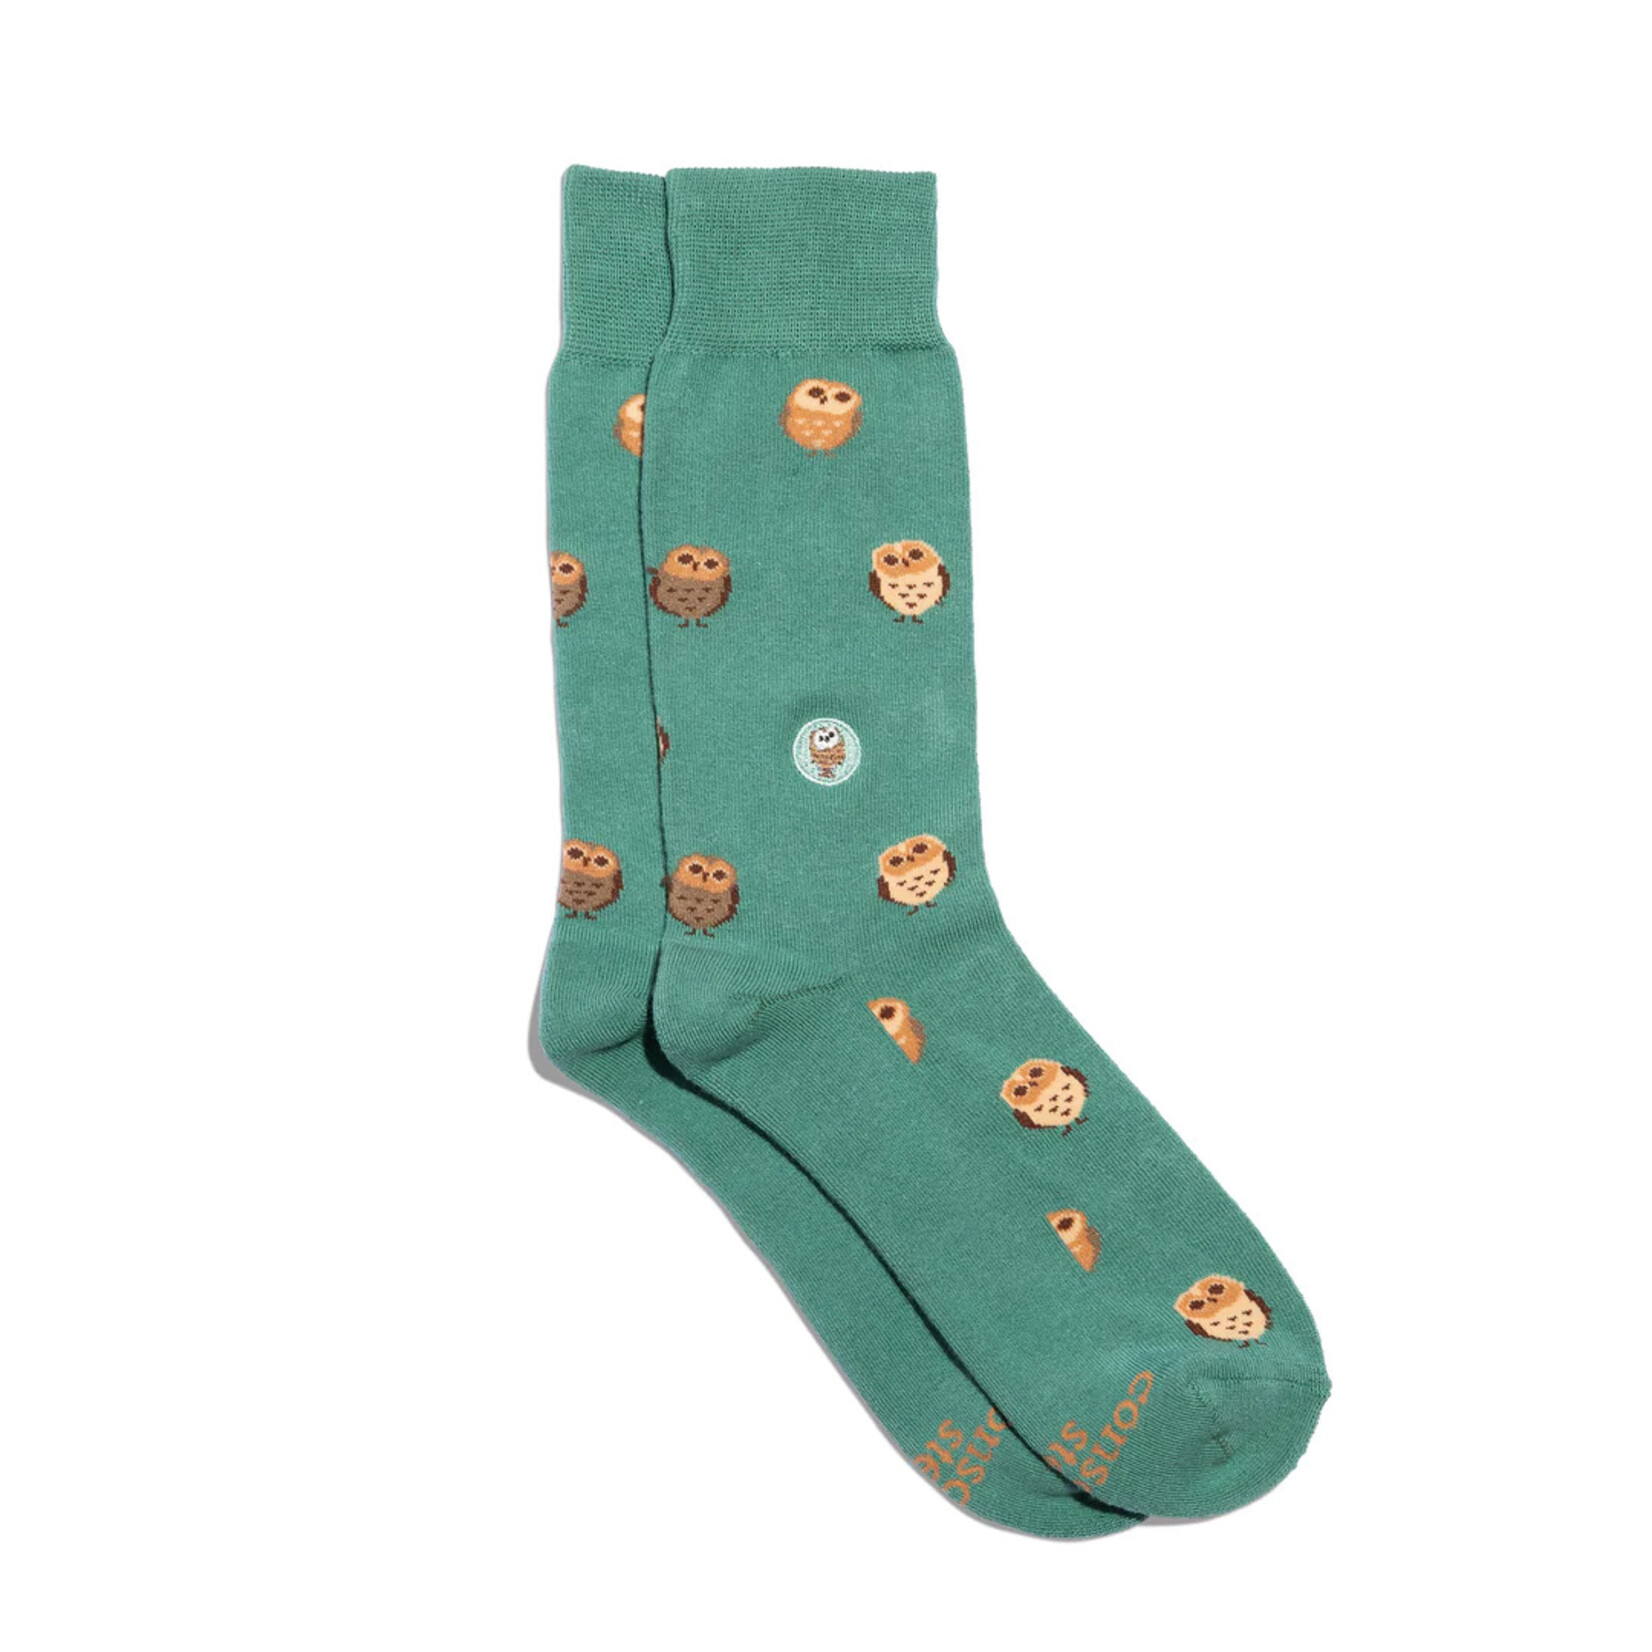 Conscious Step Socks that Protect | Owls